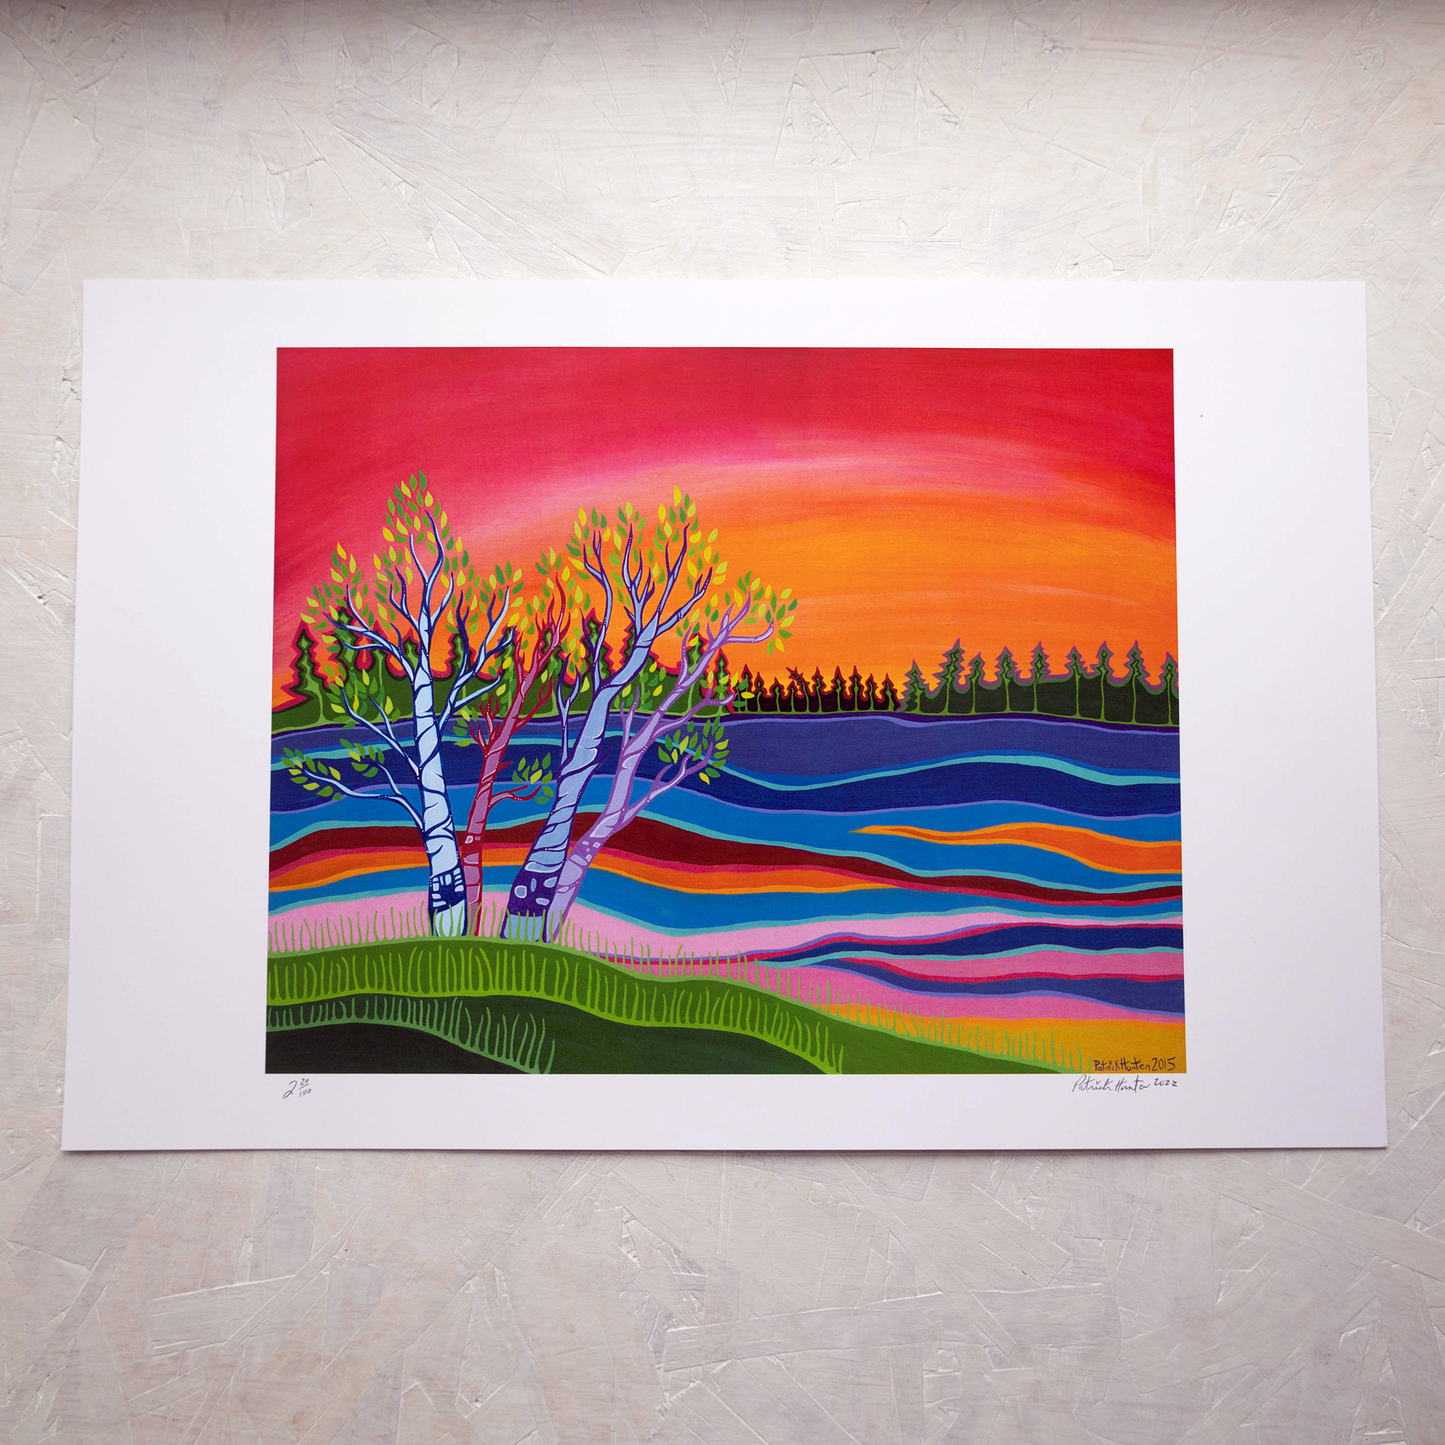 Print of Patrick Hunter's painting of Keesic Bay, bright coloured trees and water in woodland art style.